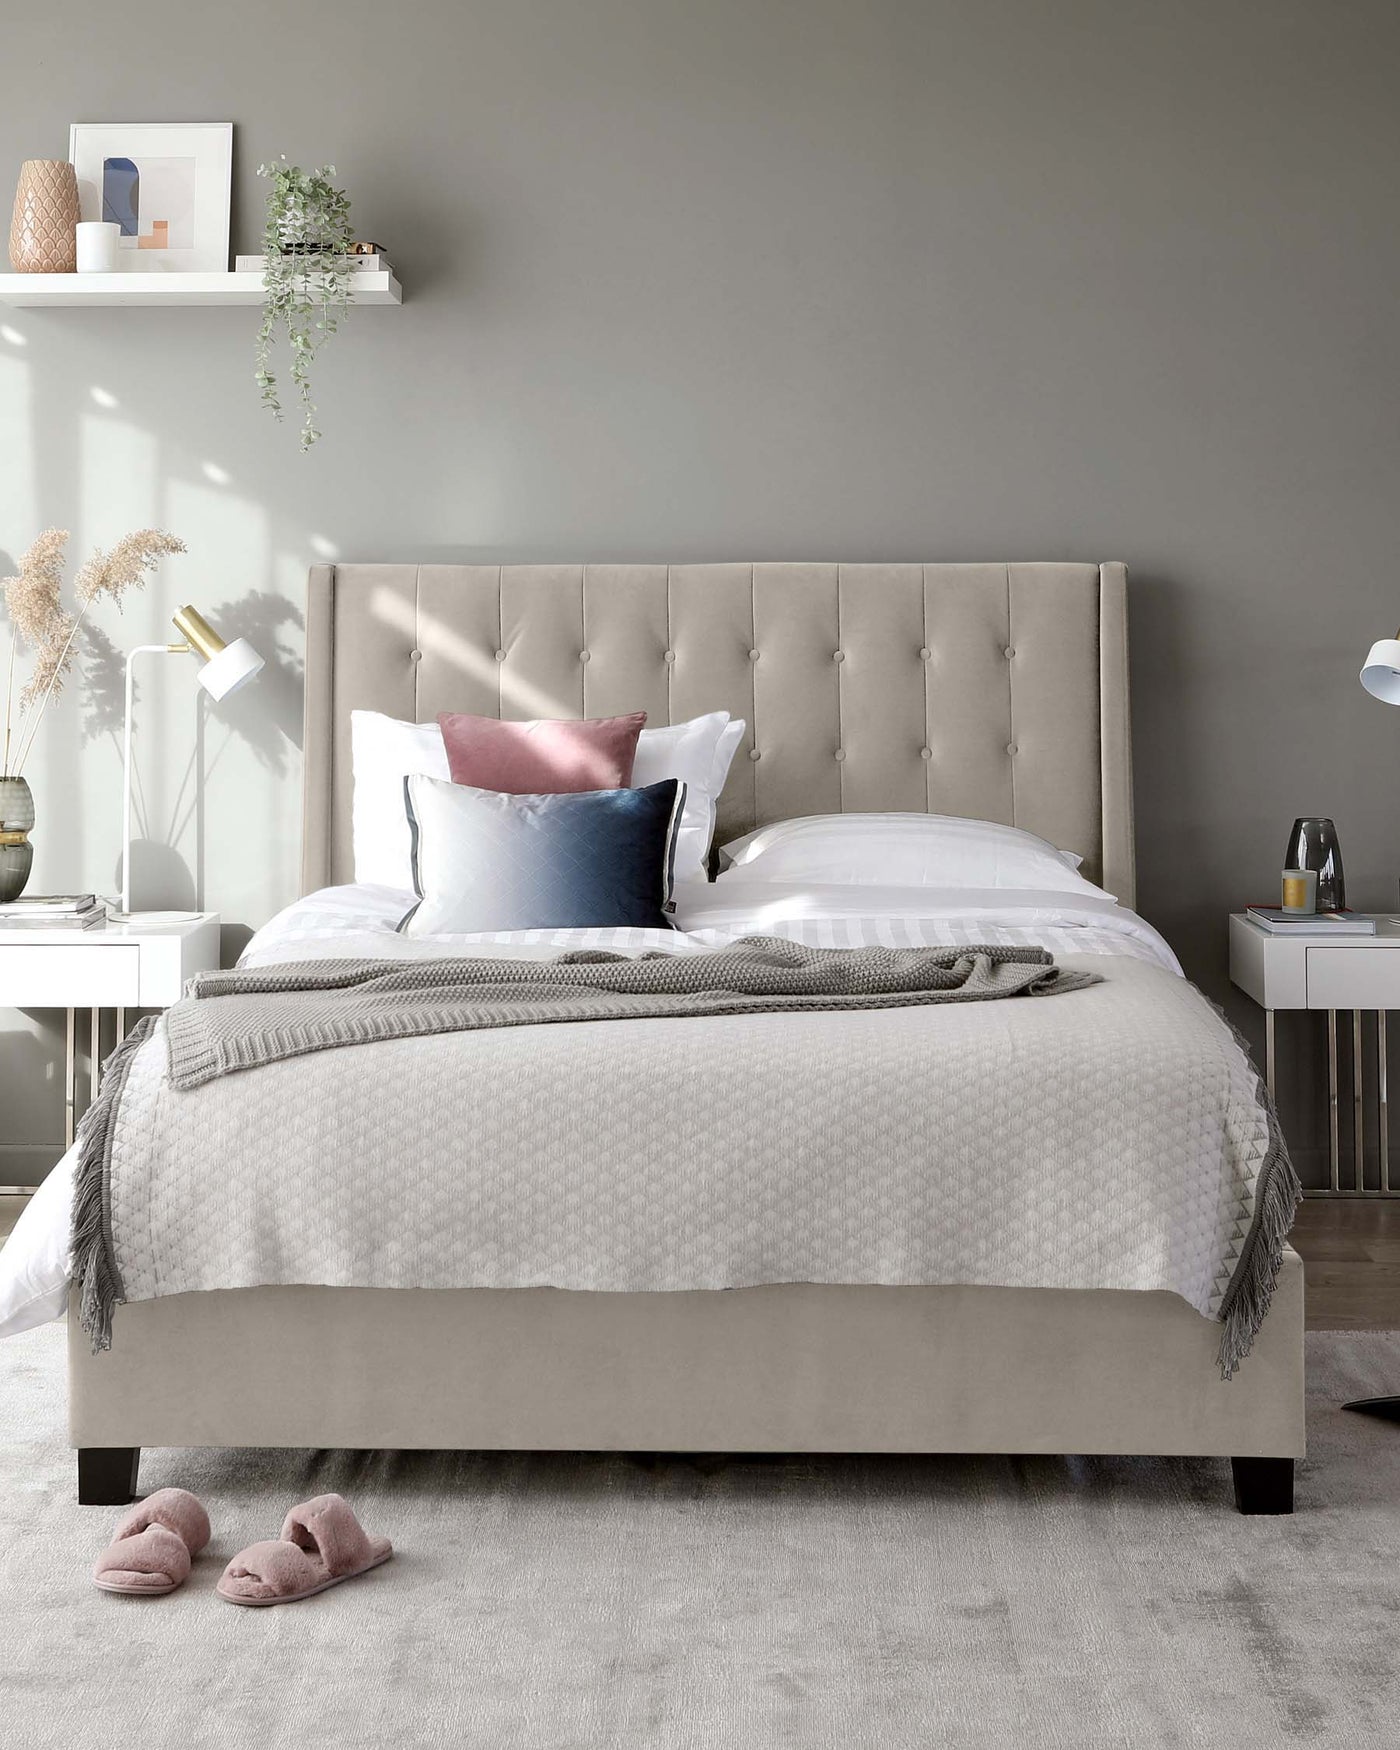 Elegant contemporary bed with a tufted headboard upholstered in a neutral grey fabric, complemented by a cosy bedding set with a mix of white and accent pillows, and a textured throw blanket. The bed is styled with symmetry in mind, flanked by matching white bedside tables and minimalist decor.